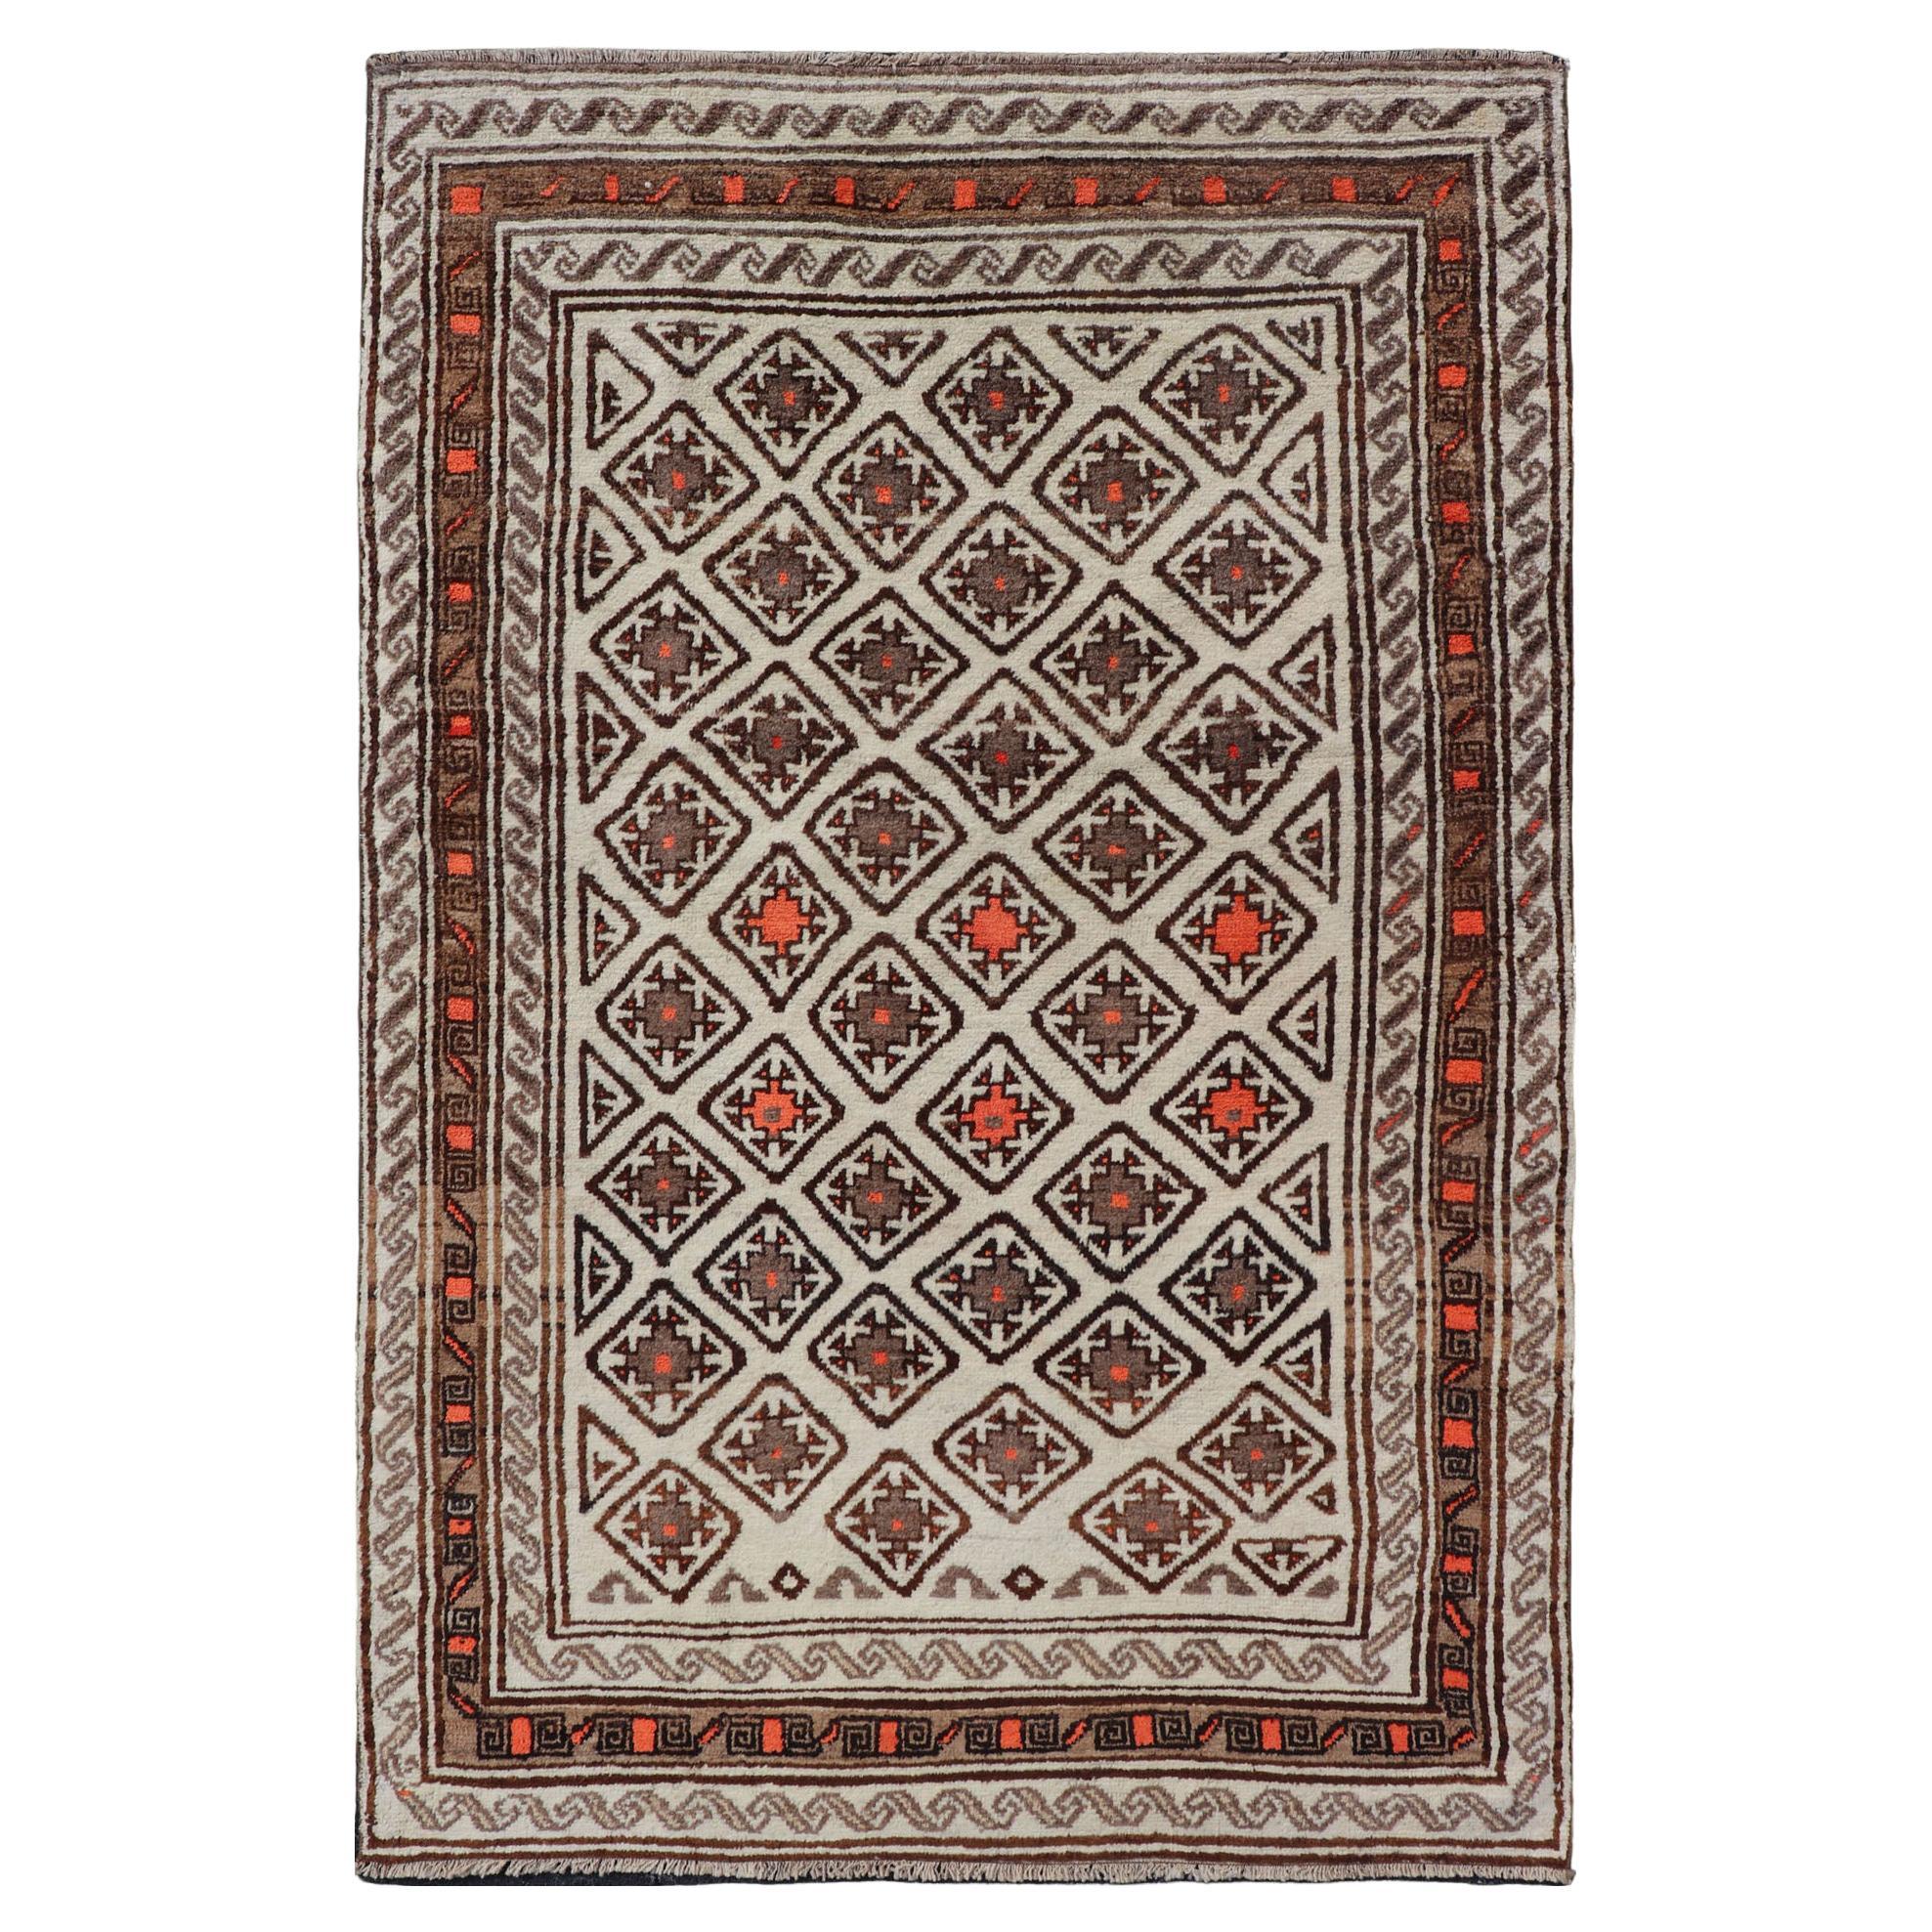 Antique Hand-Knotted Baluch Tribal Rug with All-Over Geometric Diamond Design